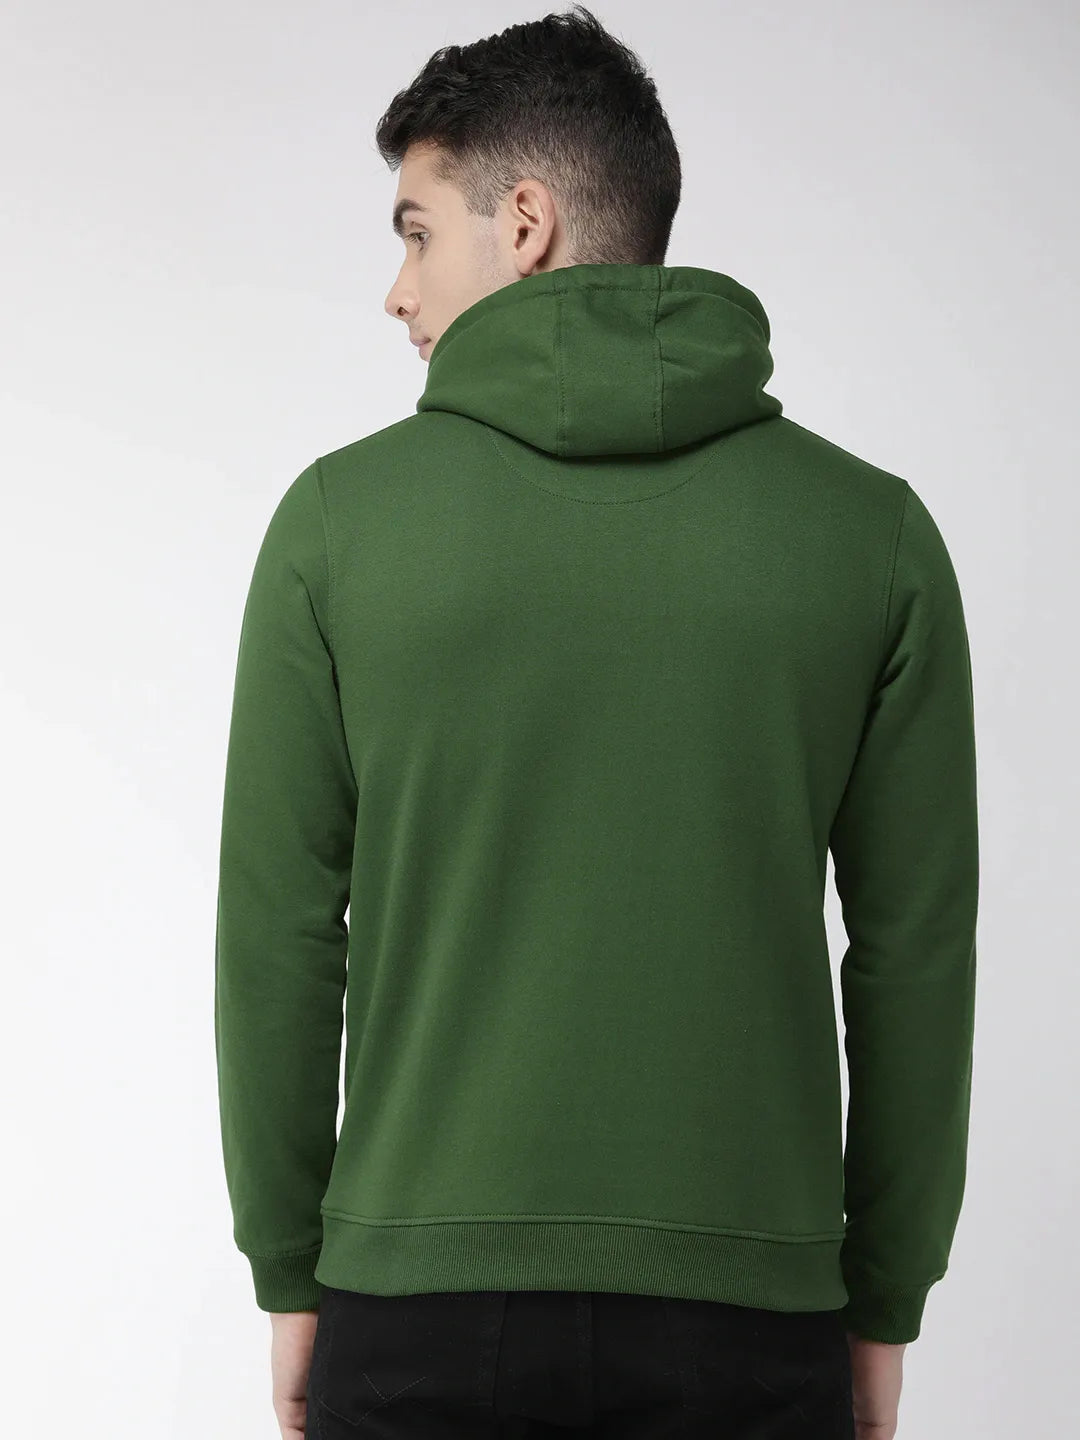 Full Sleeves Cotton Hoodie For Men and Women (Unisex) Dark green Color